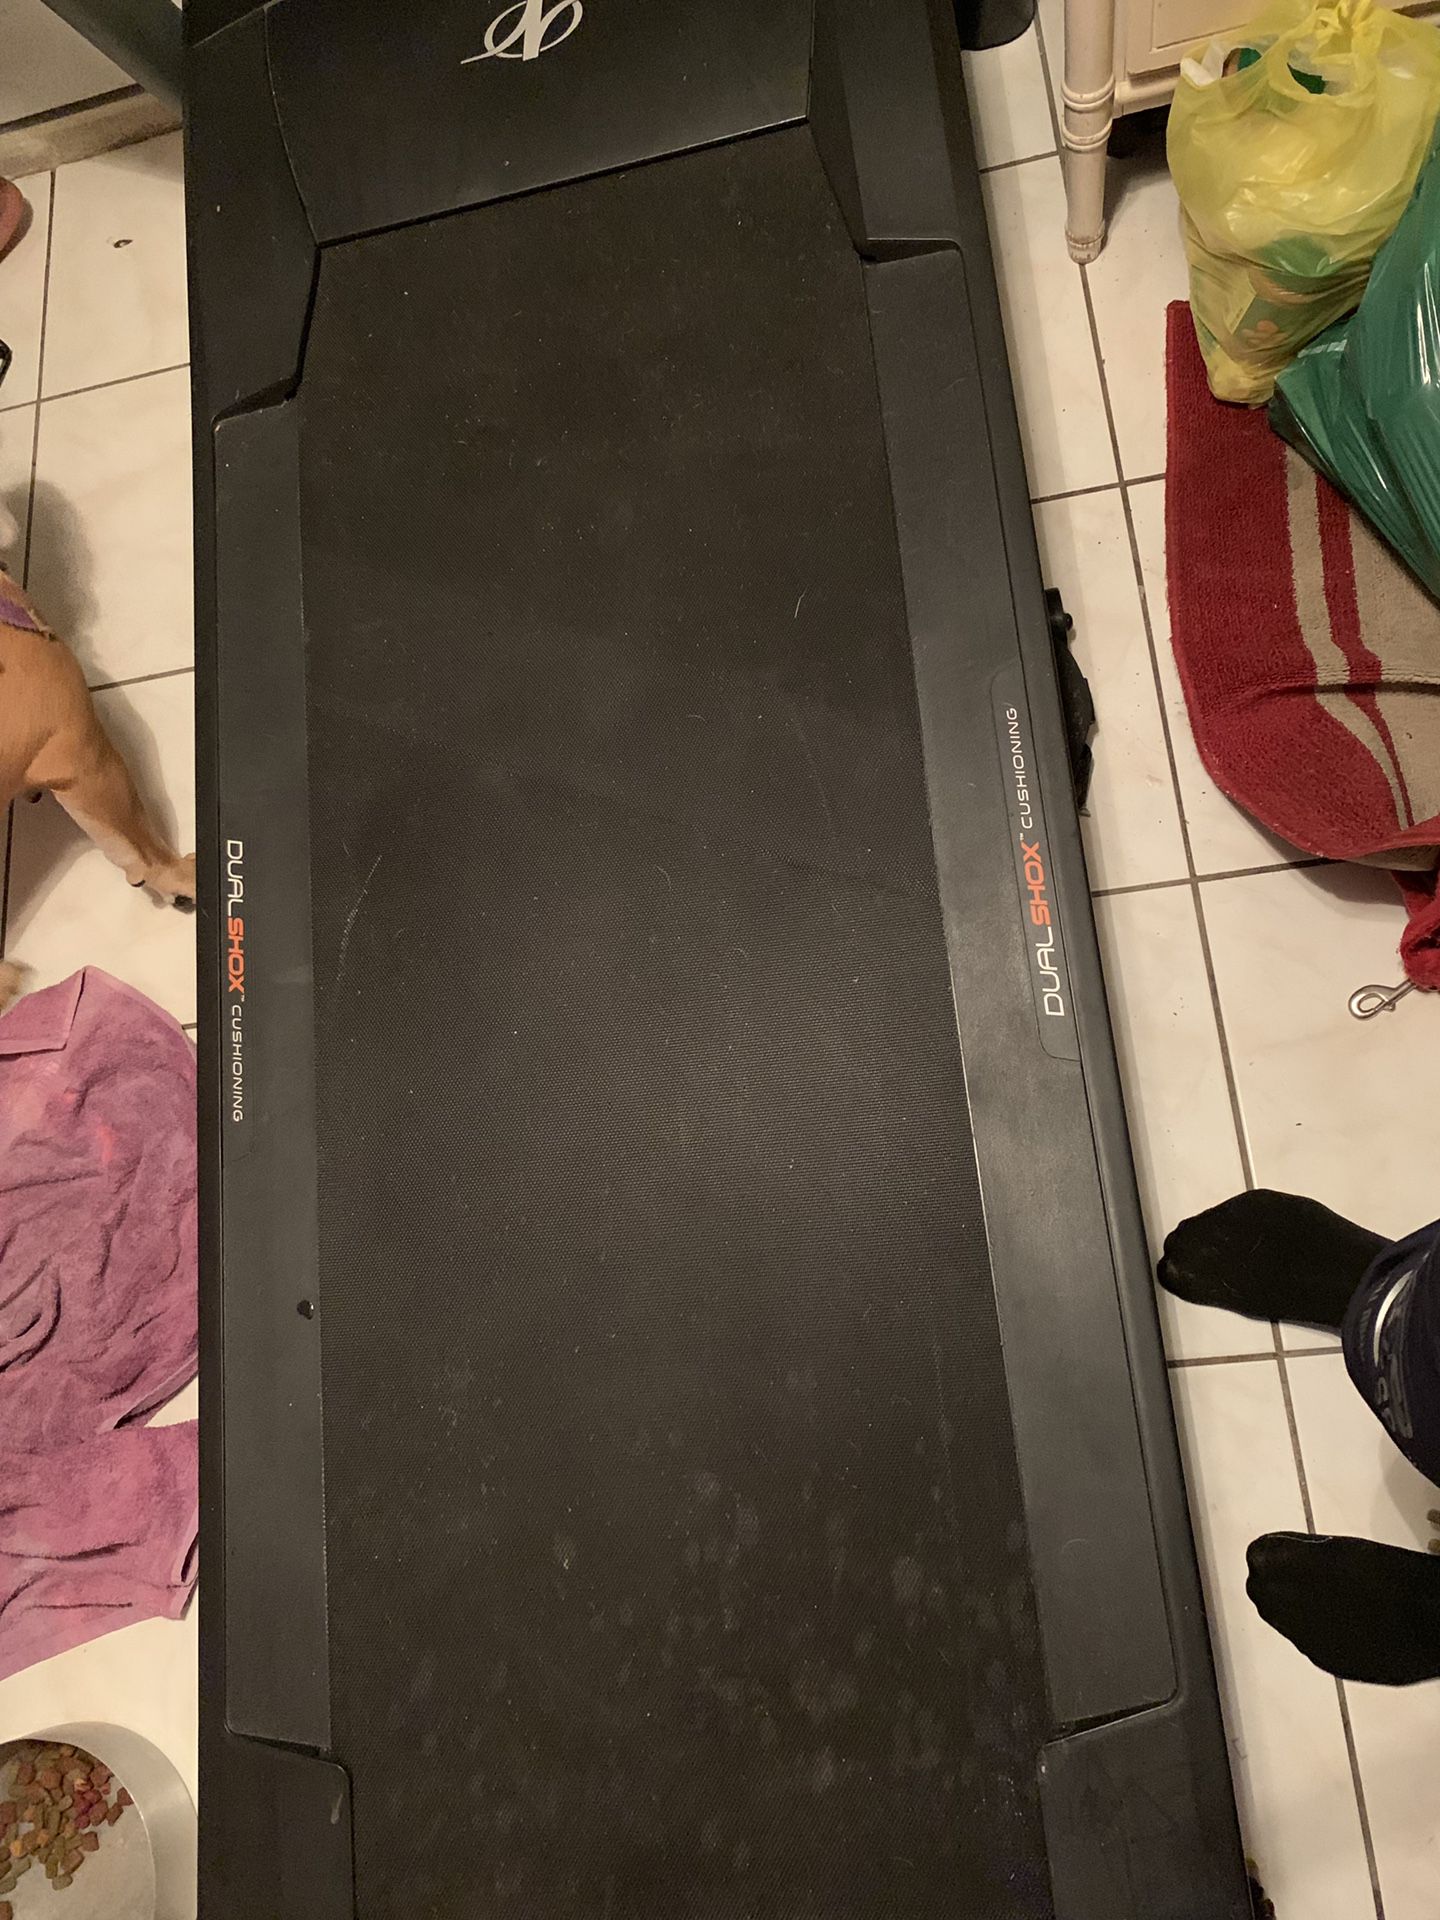 NordicTrack , good condition, use couple times. $375